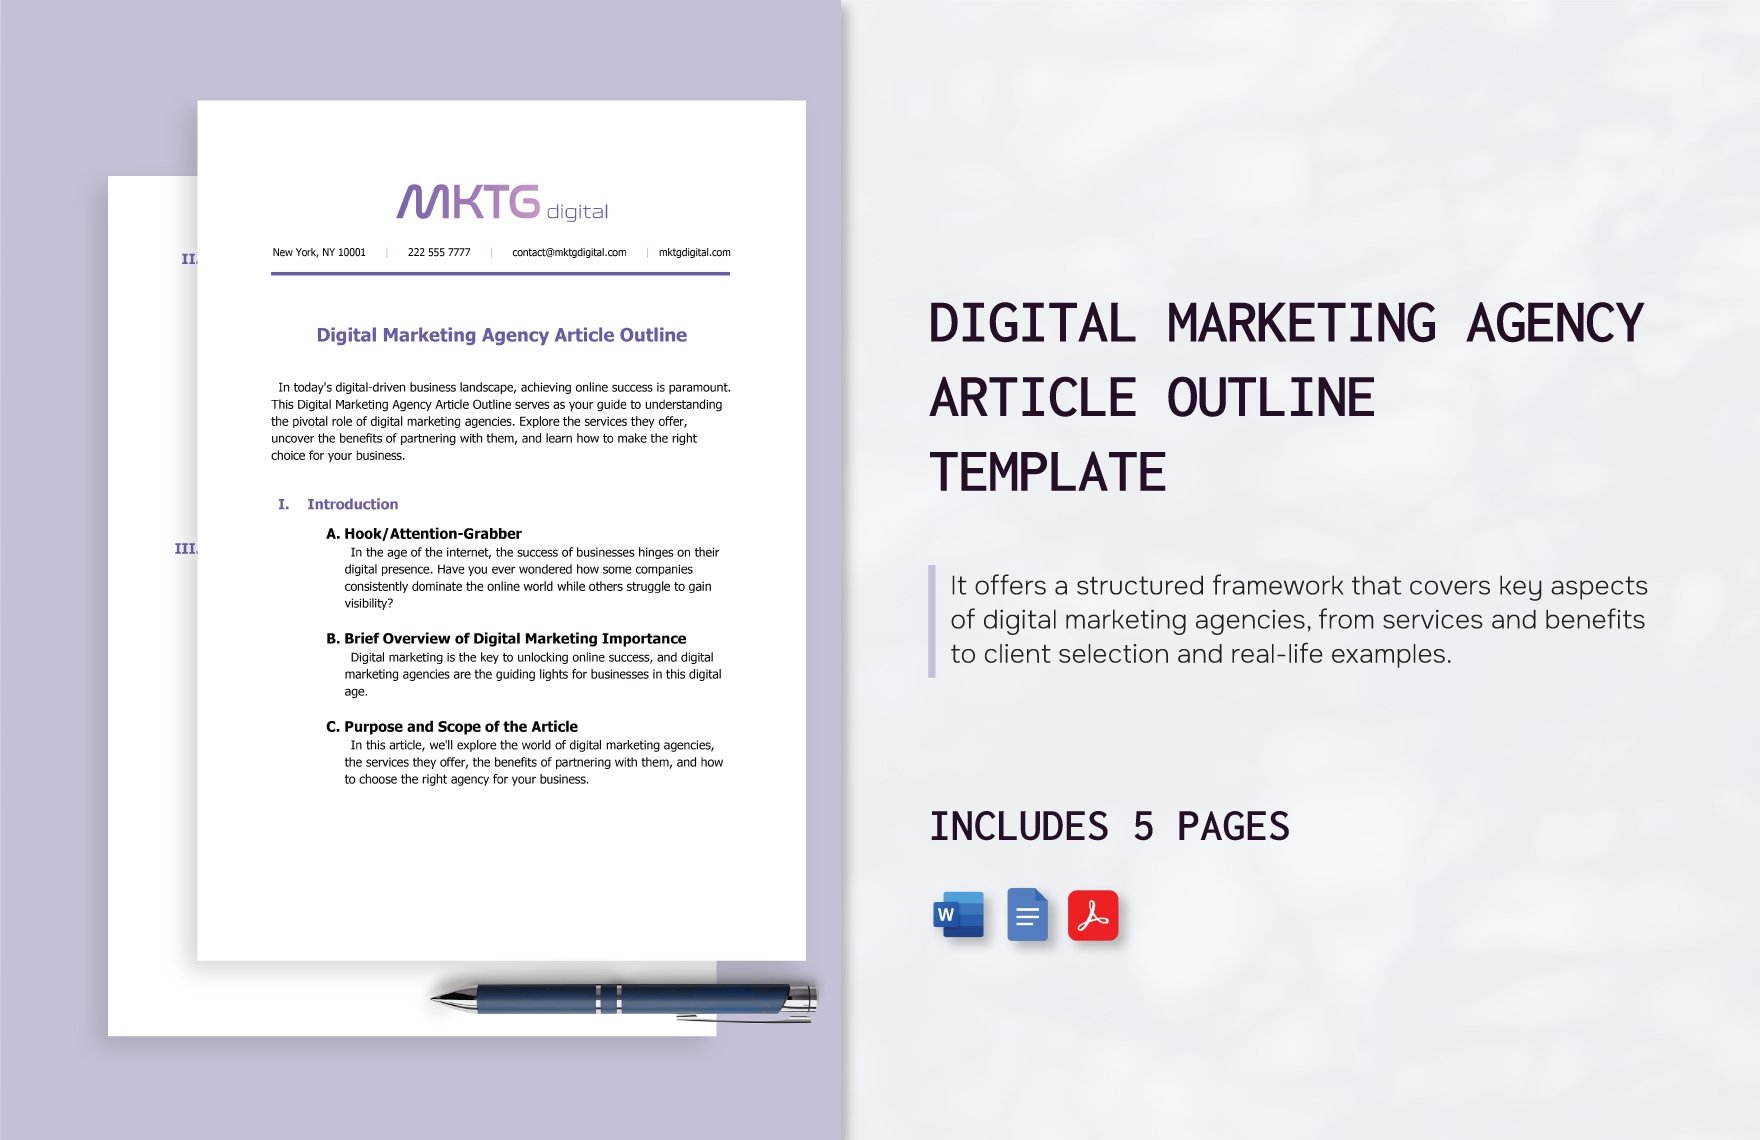 Digital Marketing Agency Article Outline Template